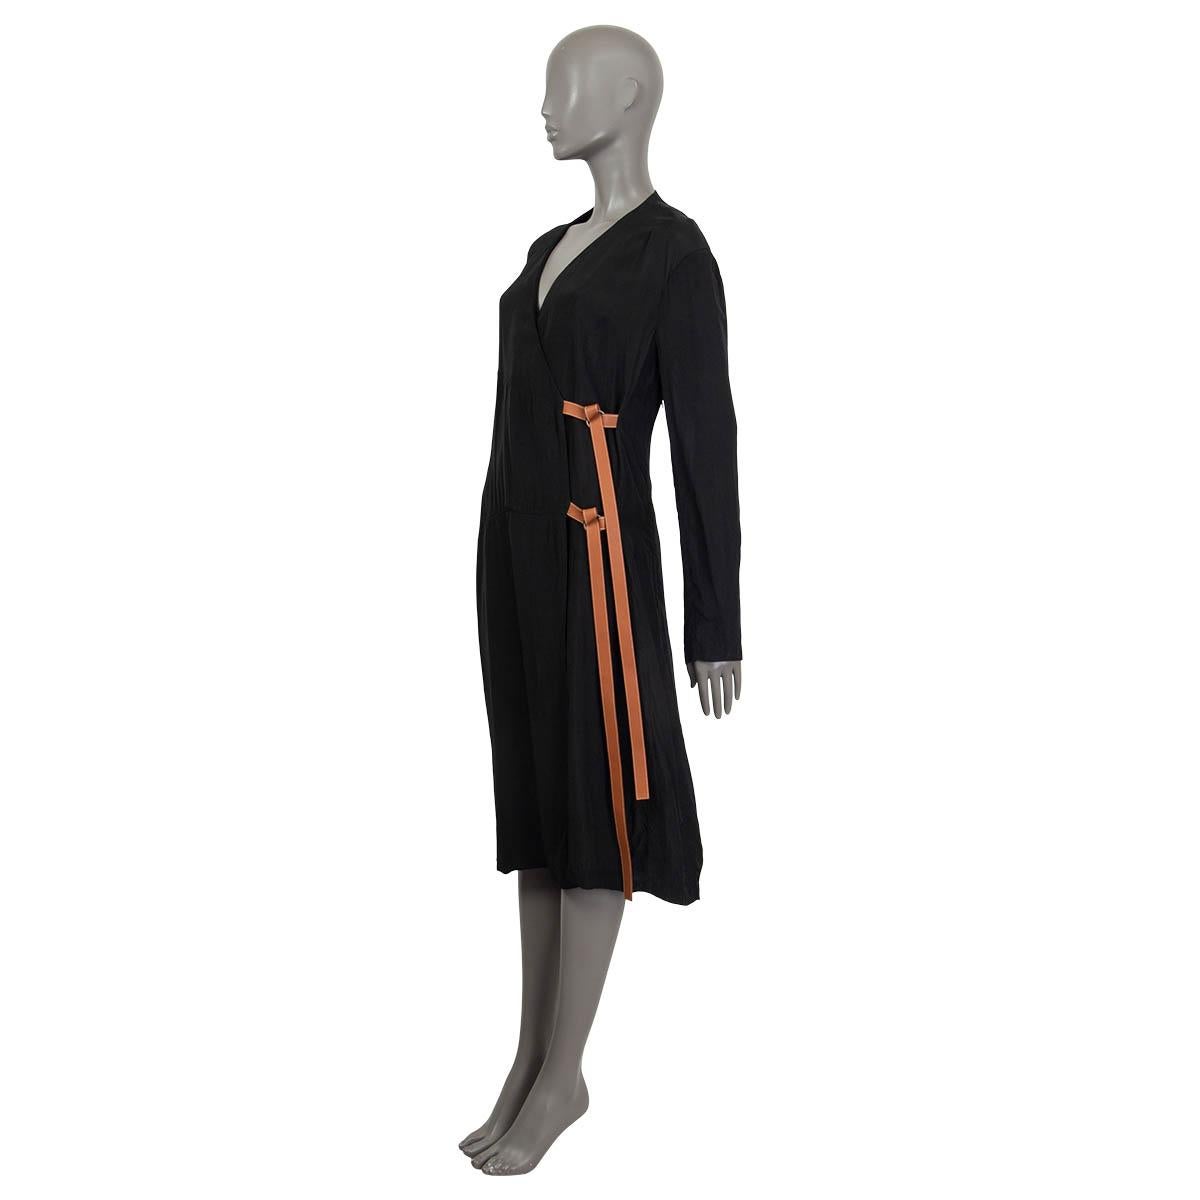 100% authentic Loewe wrap dress in black viscose (100%). Features leather straps, a deep v-neck and long sleeves. Opens with a concealed zipper at the side. Unlined. Has been worn and is in excellent condition.

Measurements
Tag